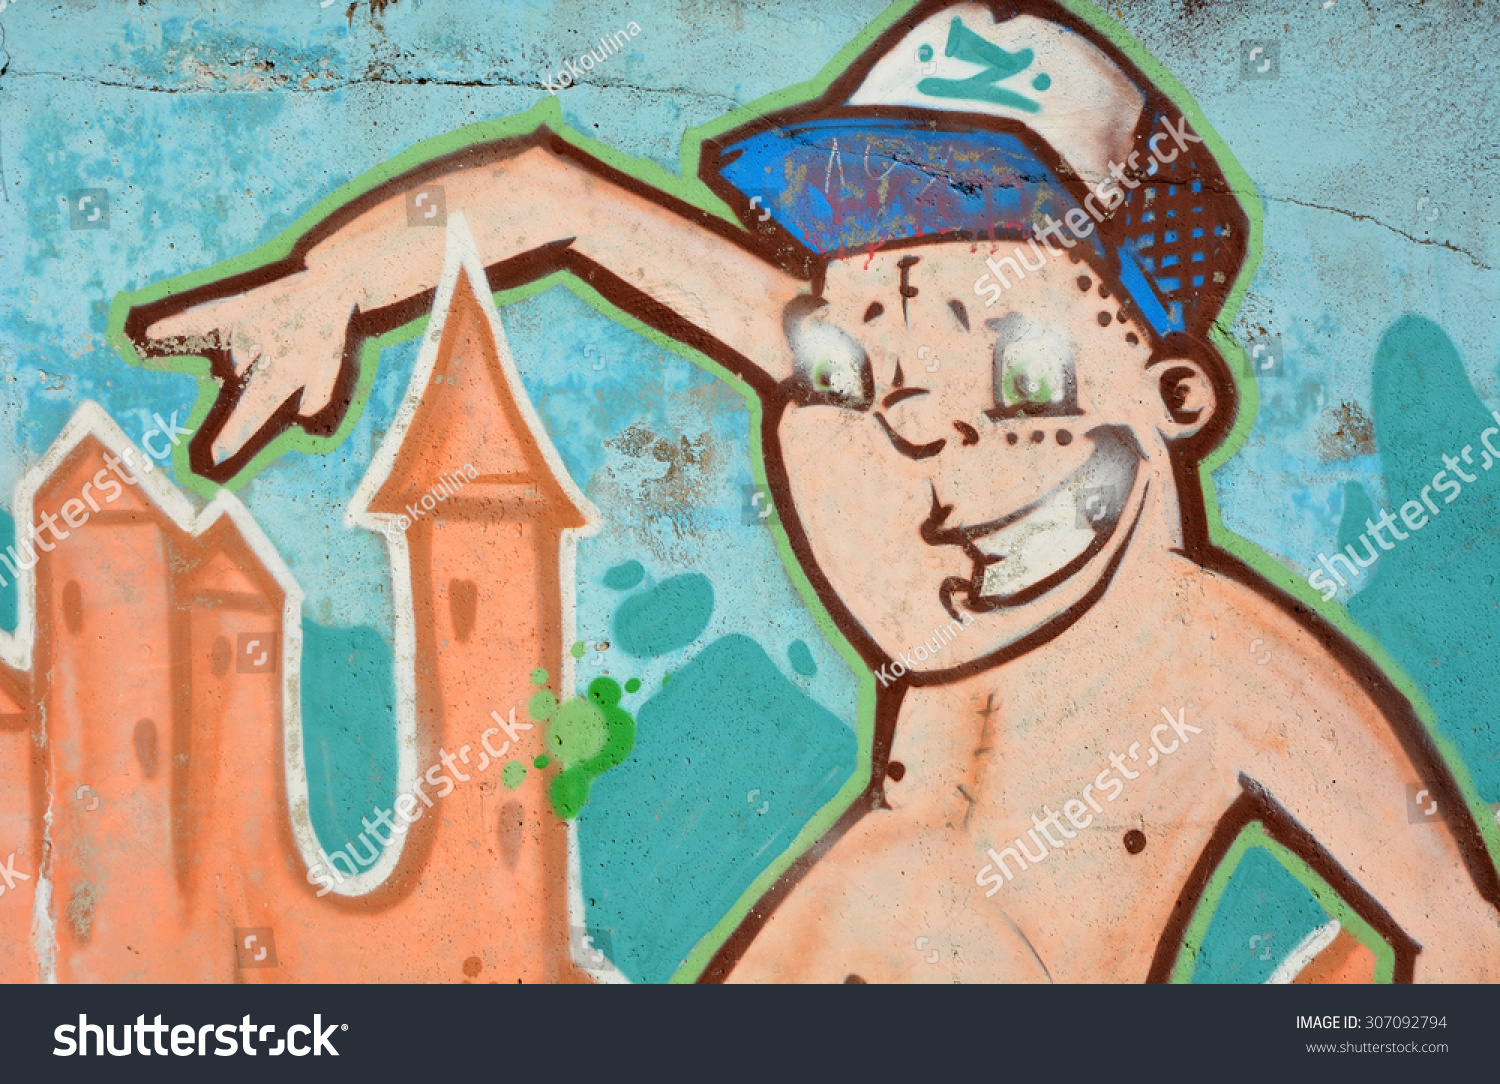 Zelenogorsk, Russia- August 16: Graffiti On The Wall Of The Abandoned